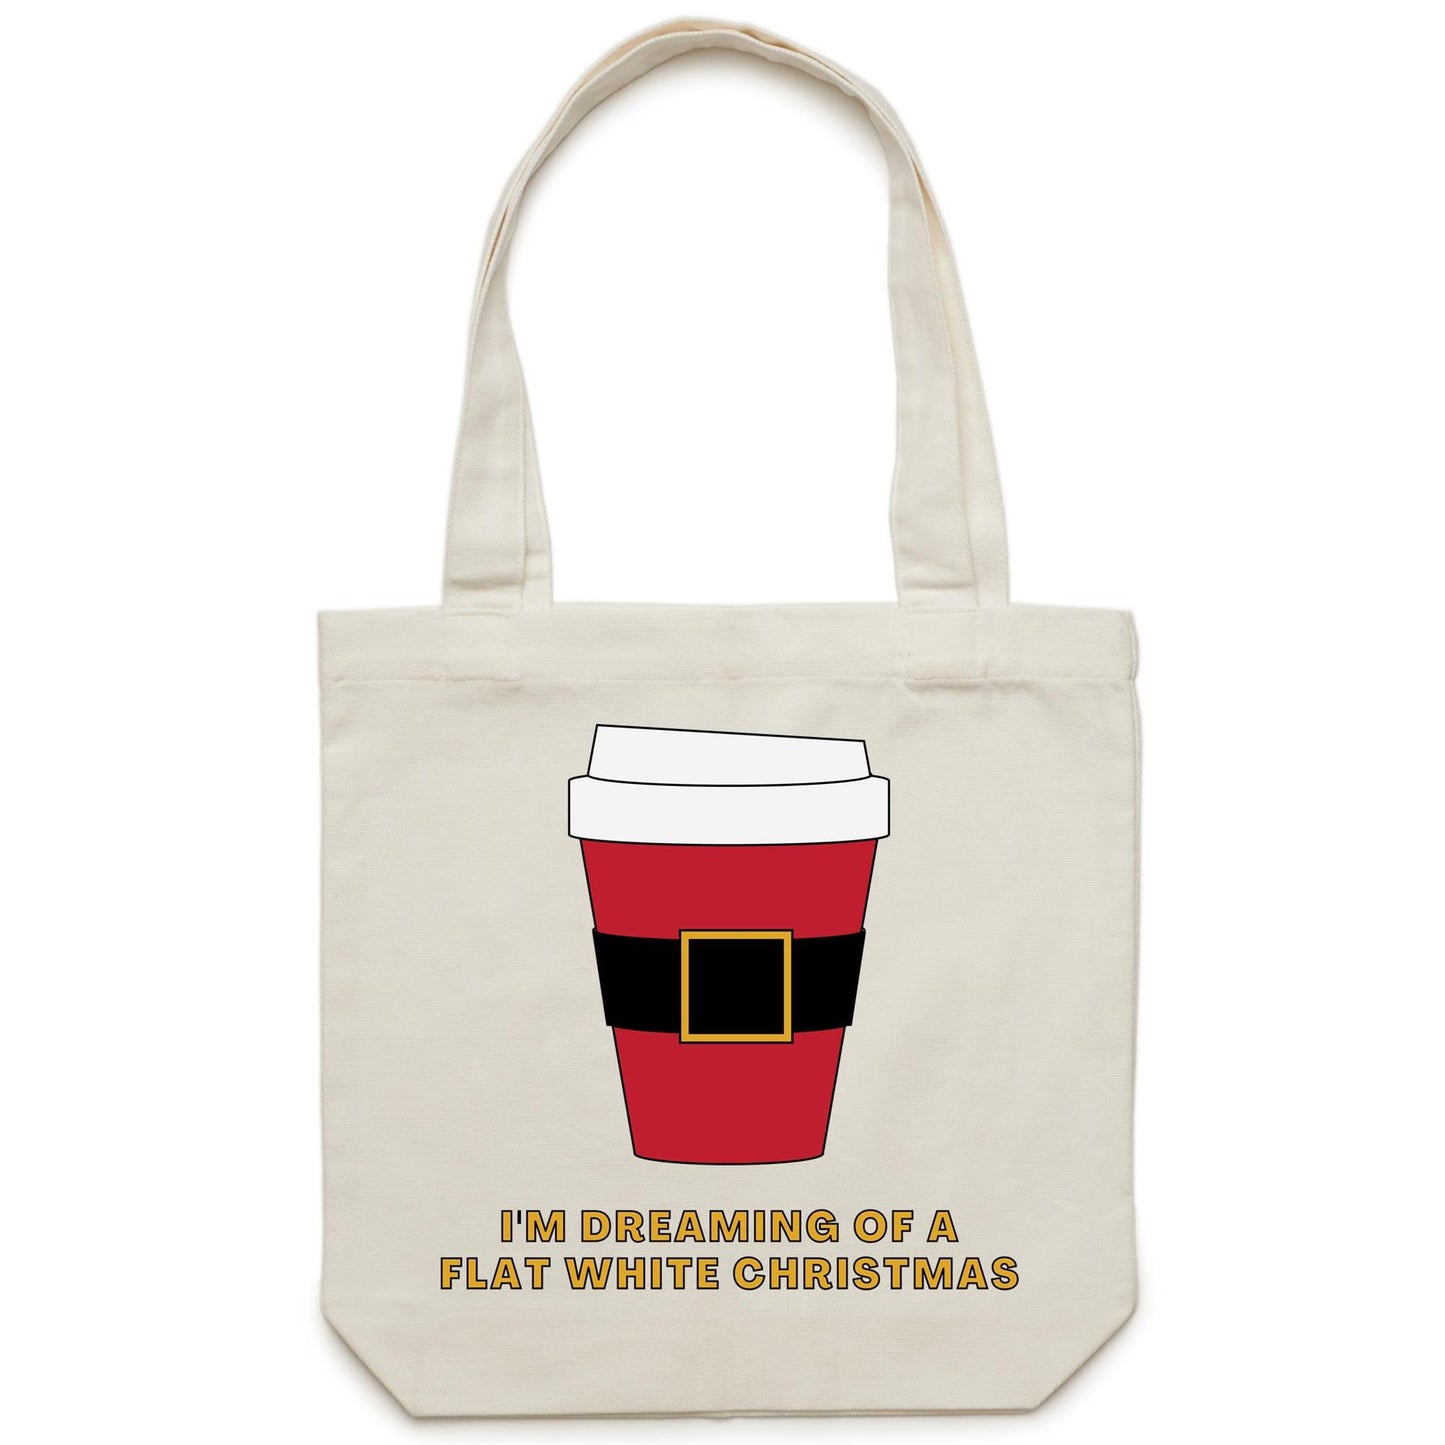 I'm Dreaming Of A Flat White Christmas - Canvas Tote Bag Cream One Size Christmas Tote Bag Merry Christmas